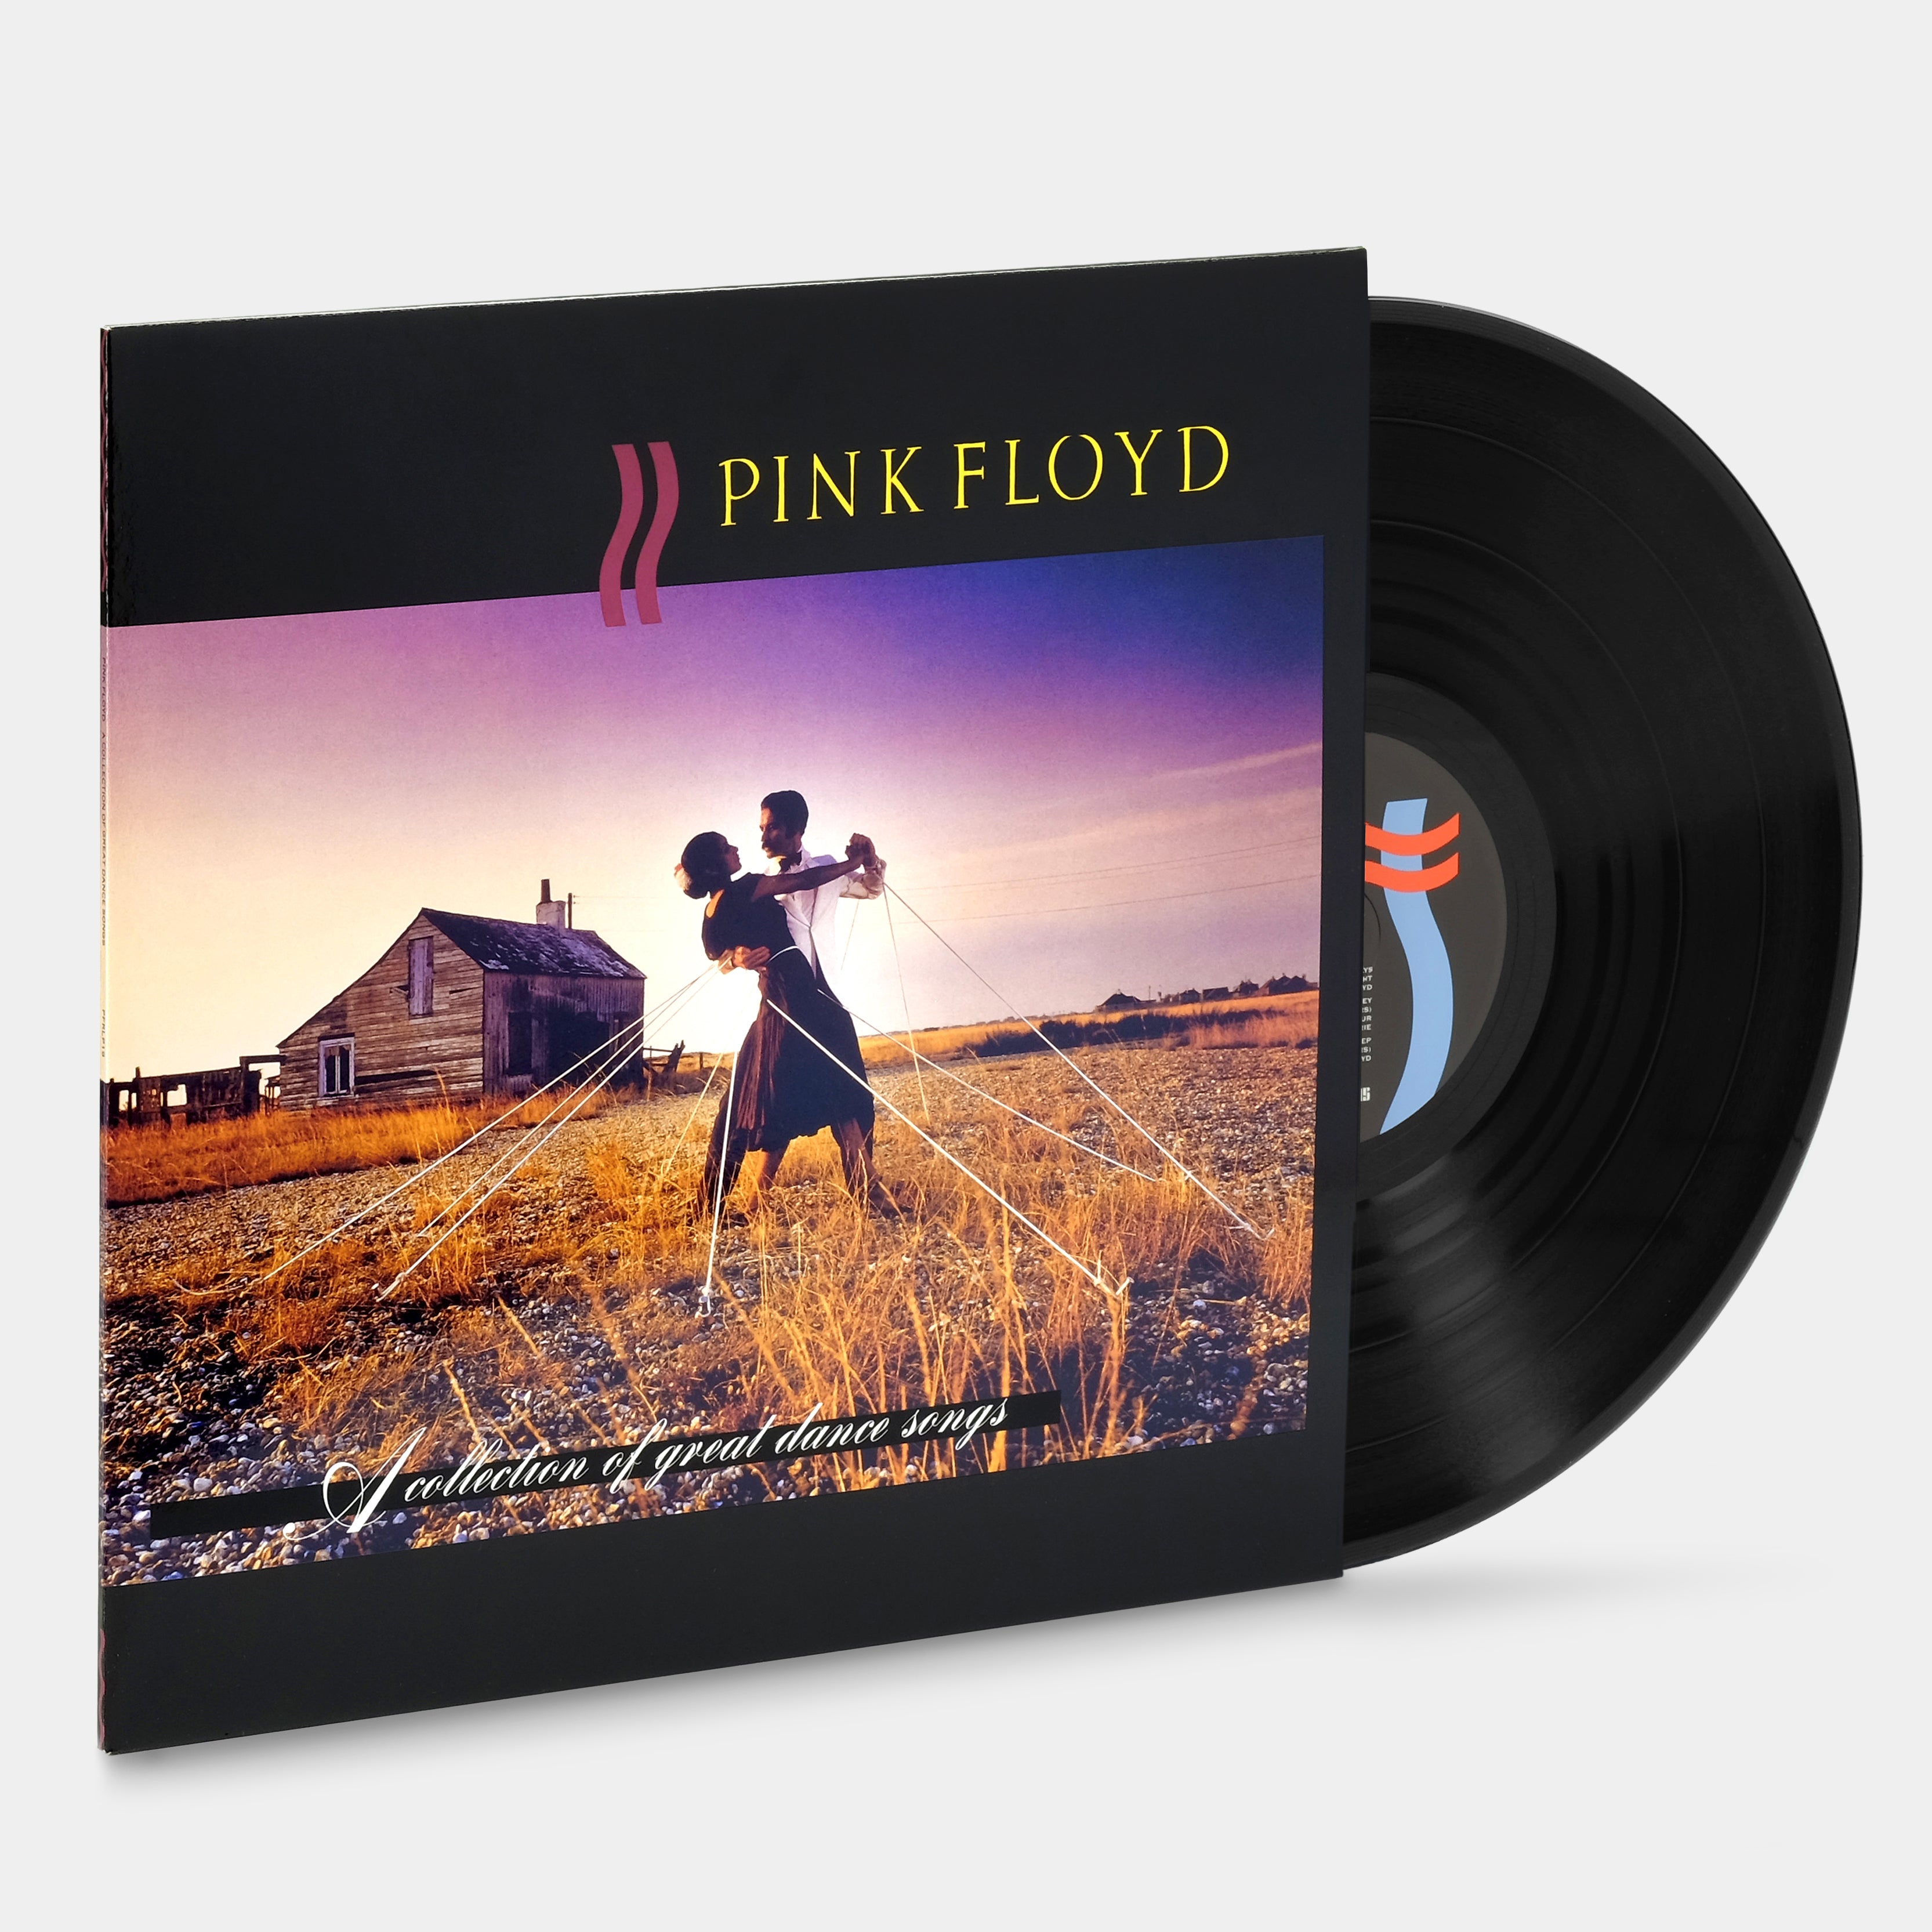 Pink Floyd - A Collection of Great Dance Songs LP Vinyl Record